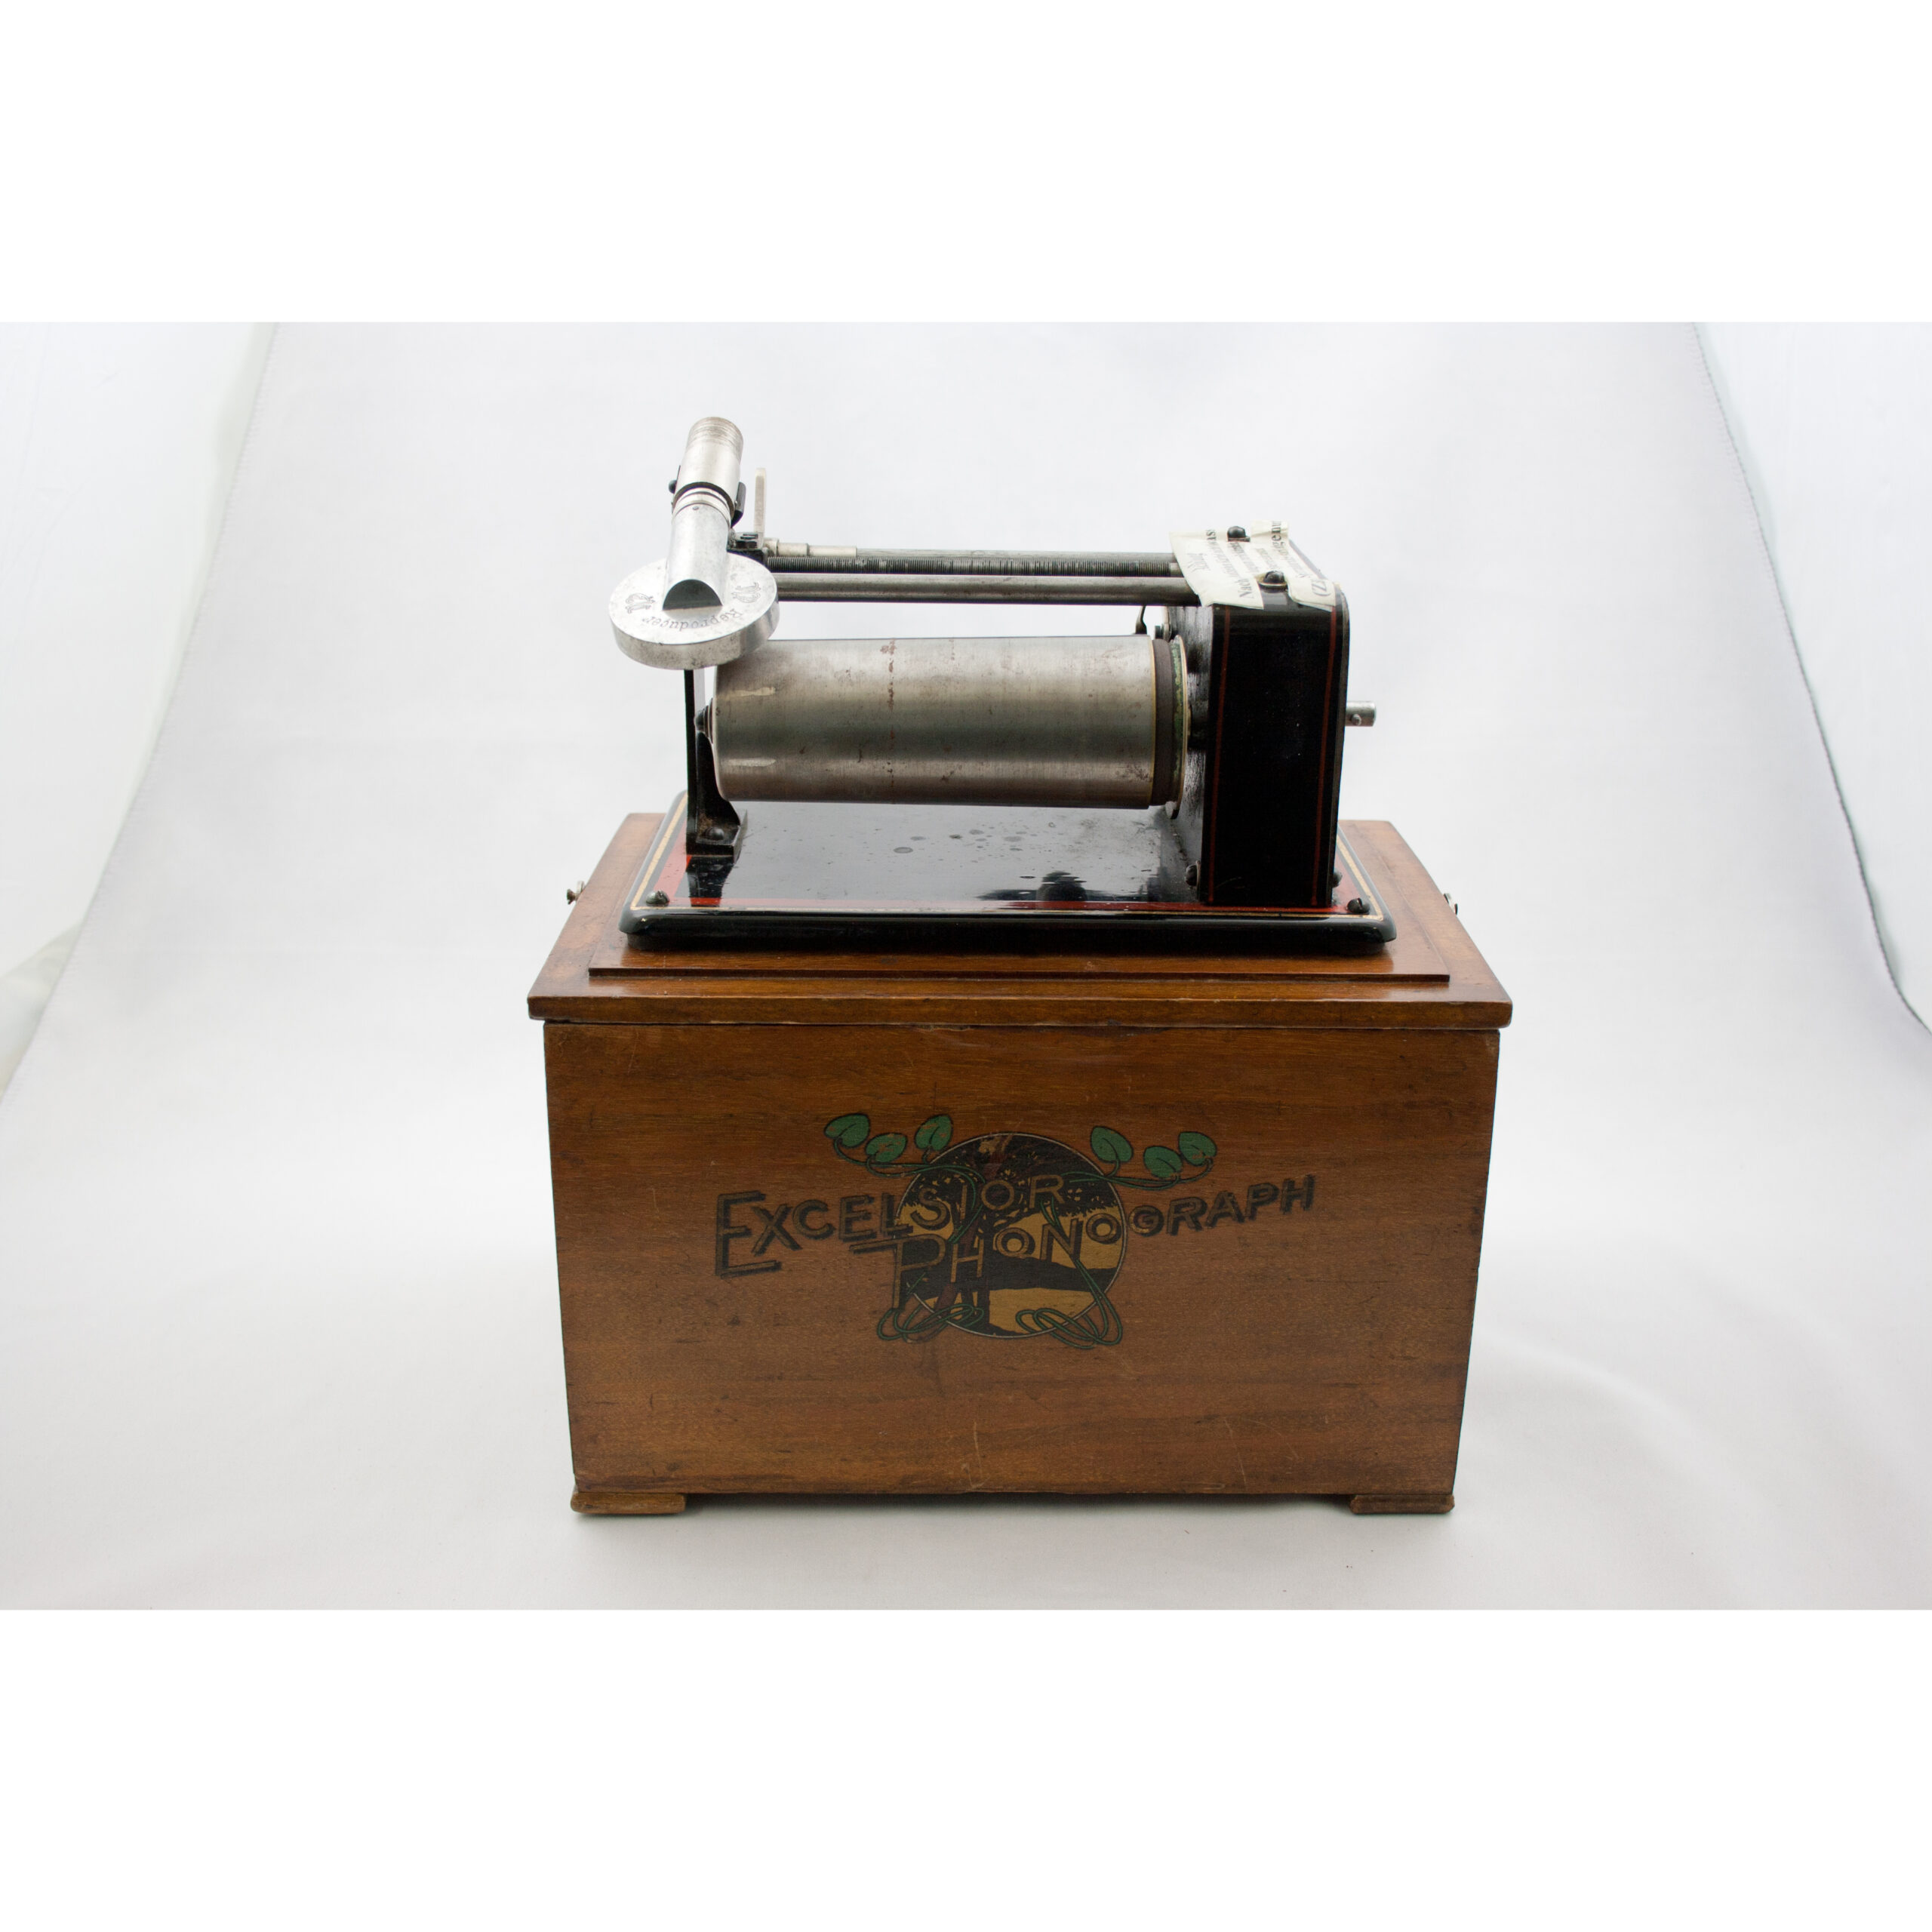 Excelsior Phonograph